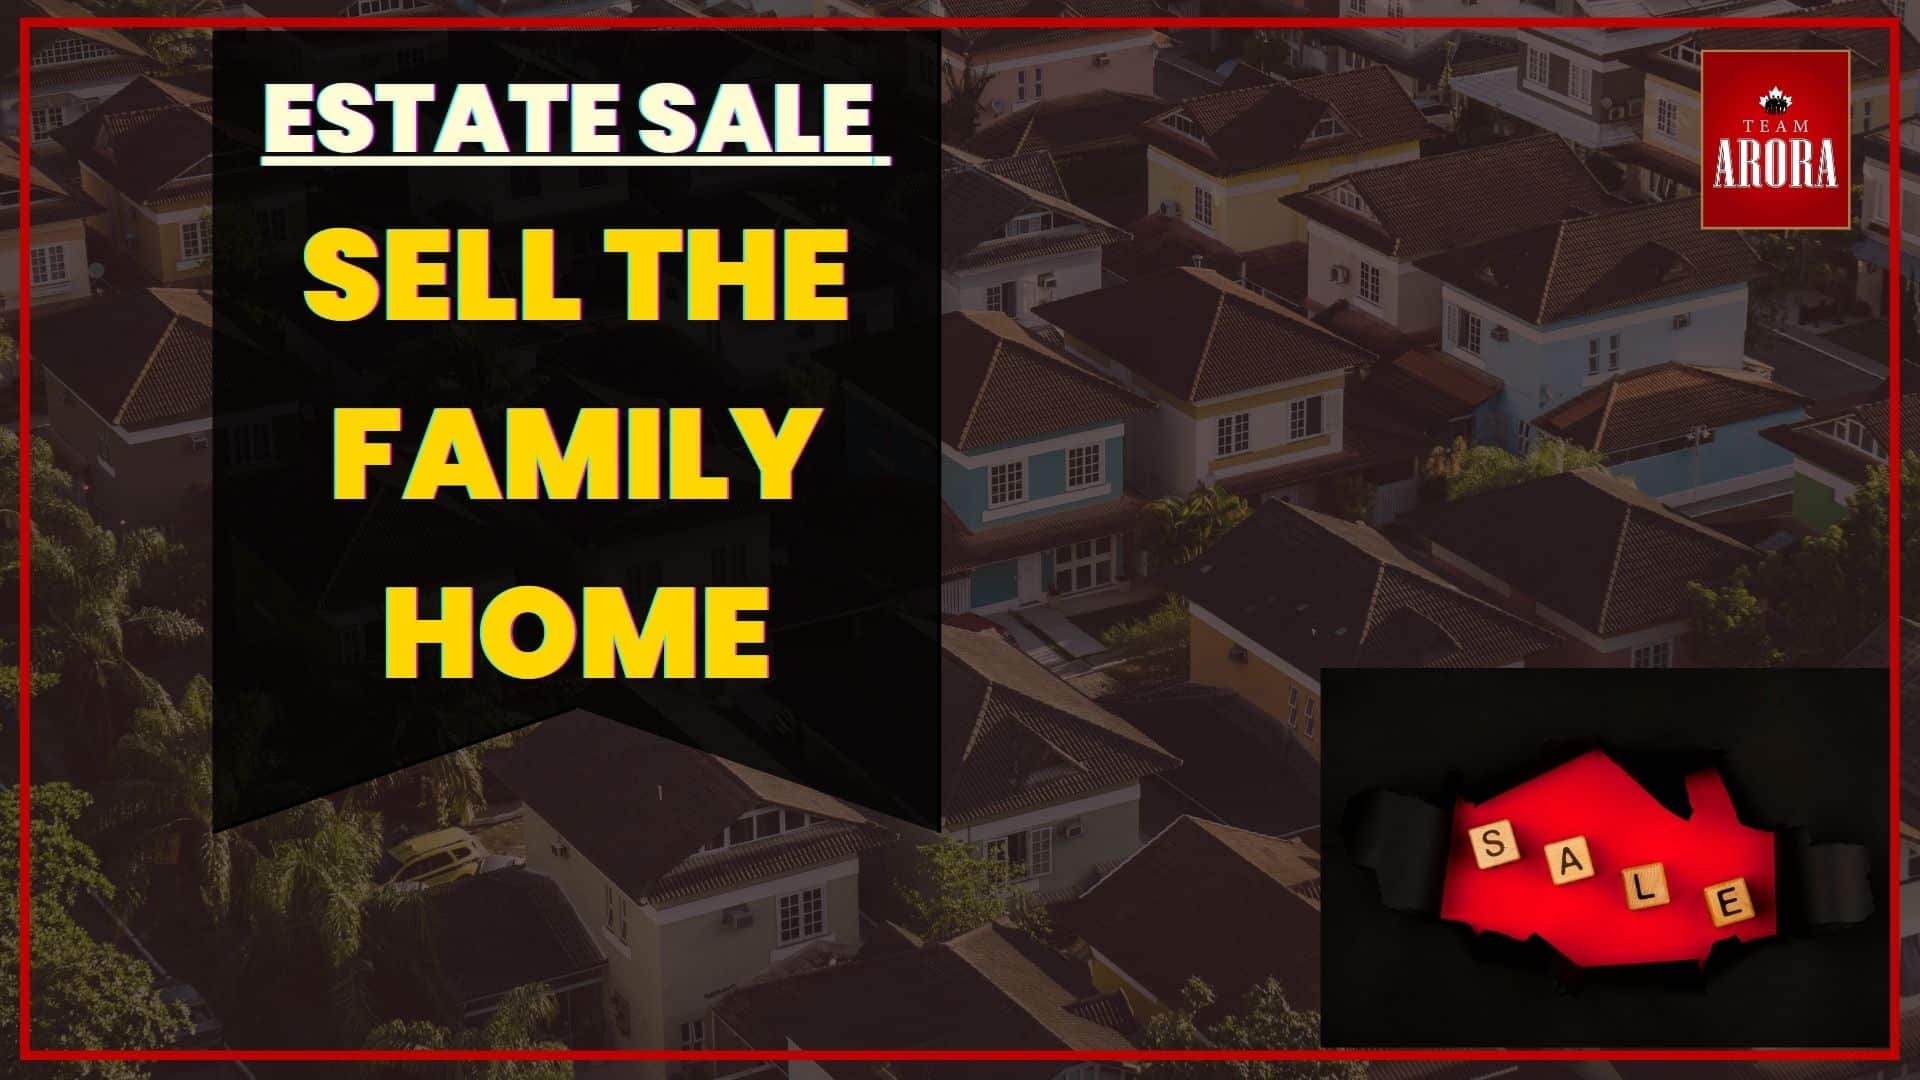 Estate Sale: When It’s Time to Sell the Family Home